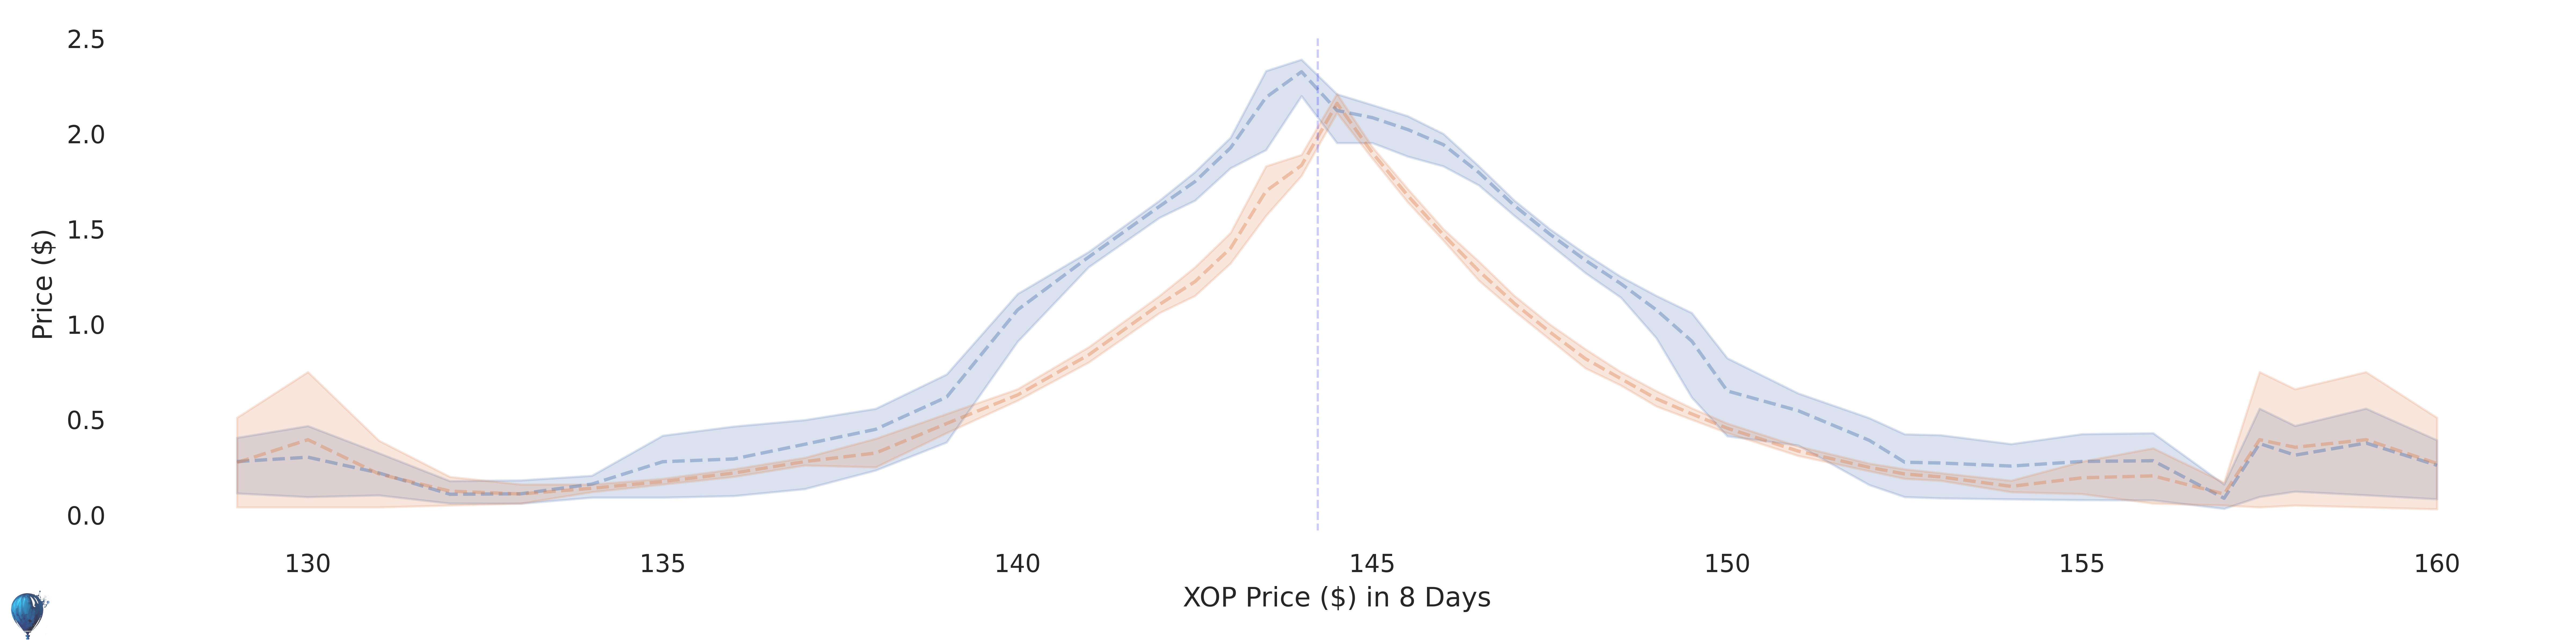 XOP current options pricing